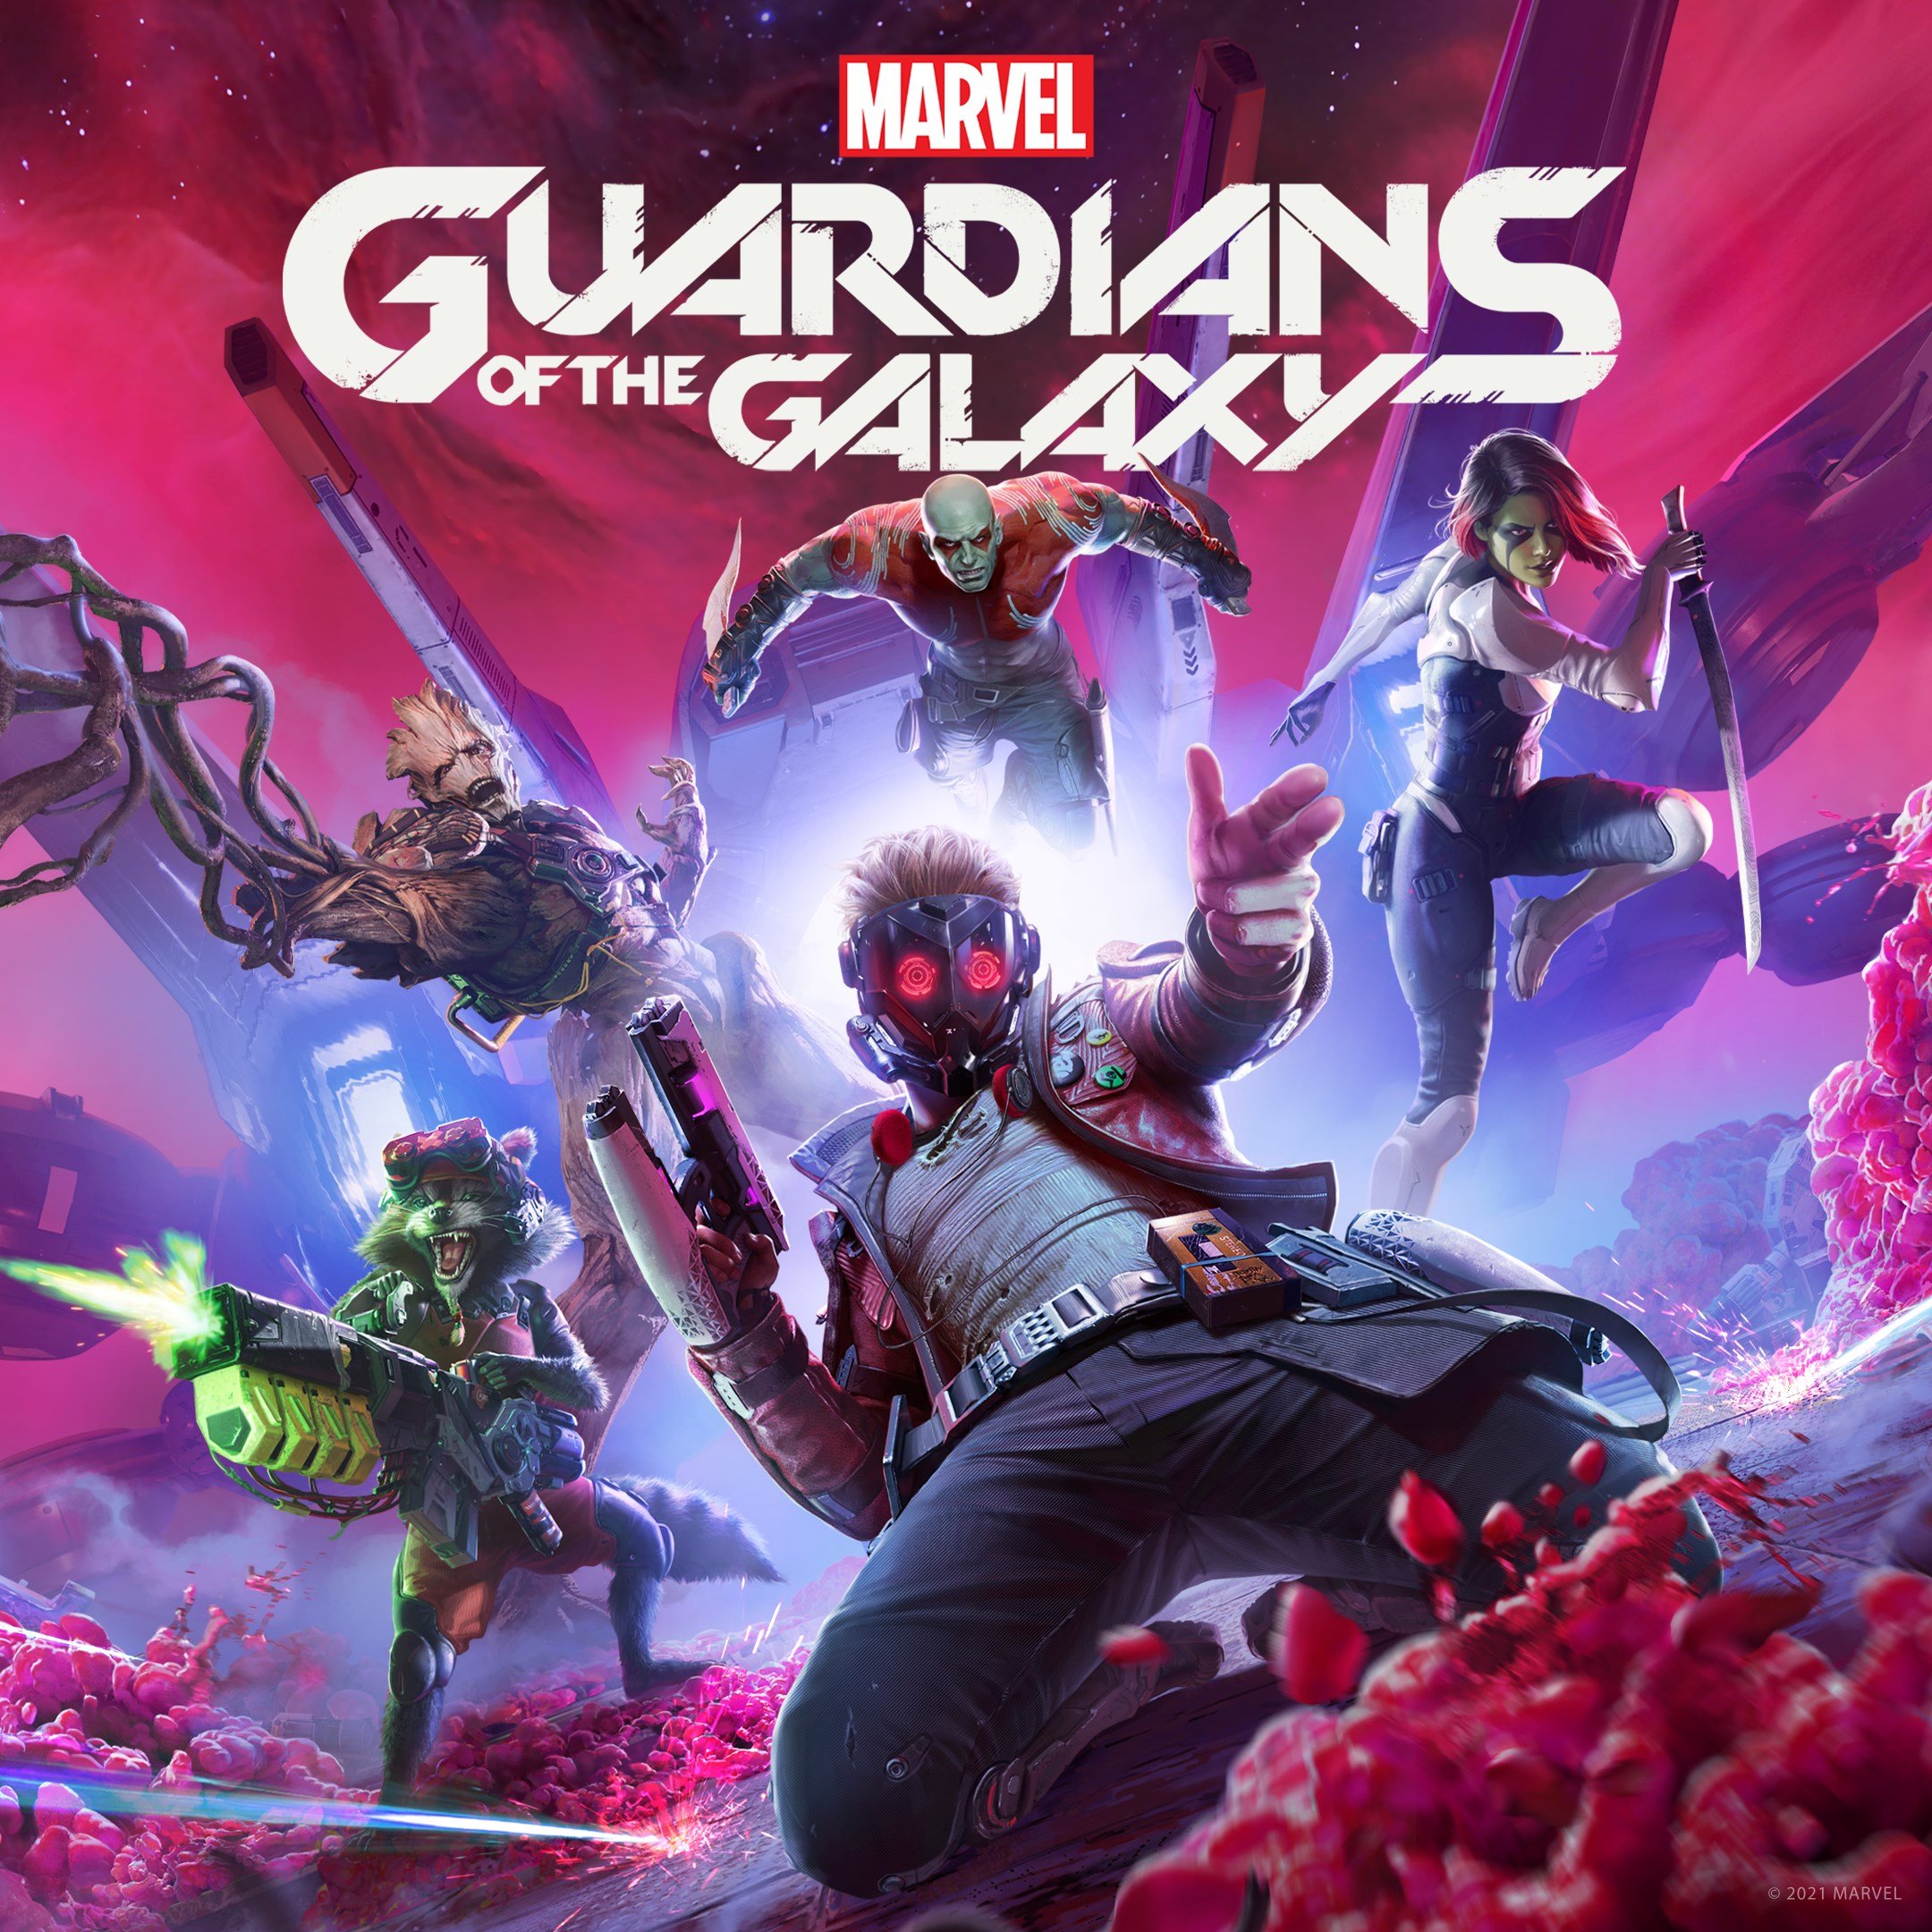 Boxart for Marvel's Guardians of the Galaxy